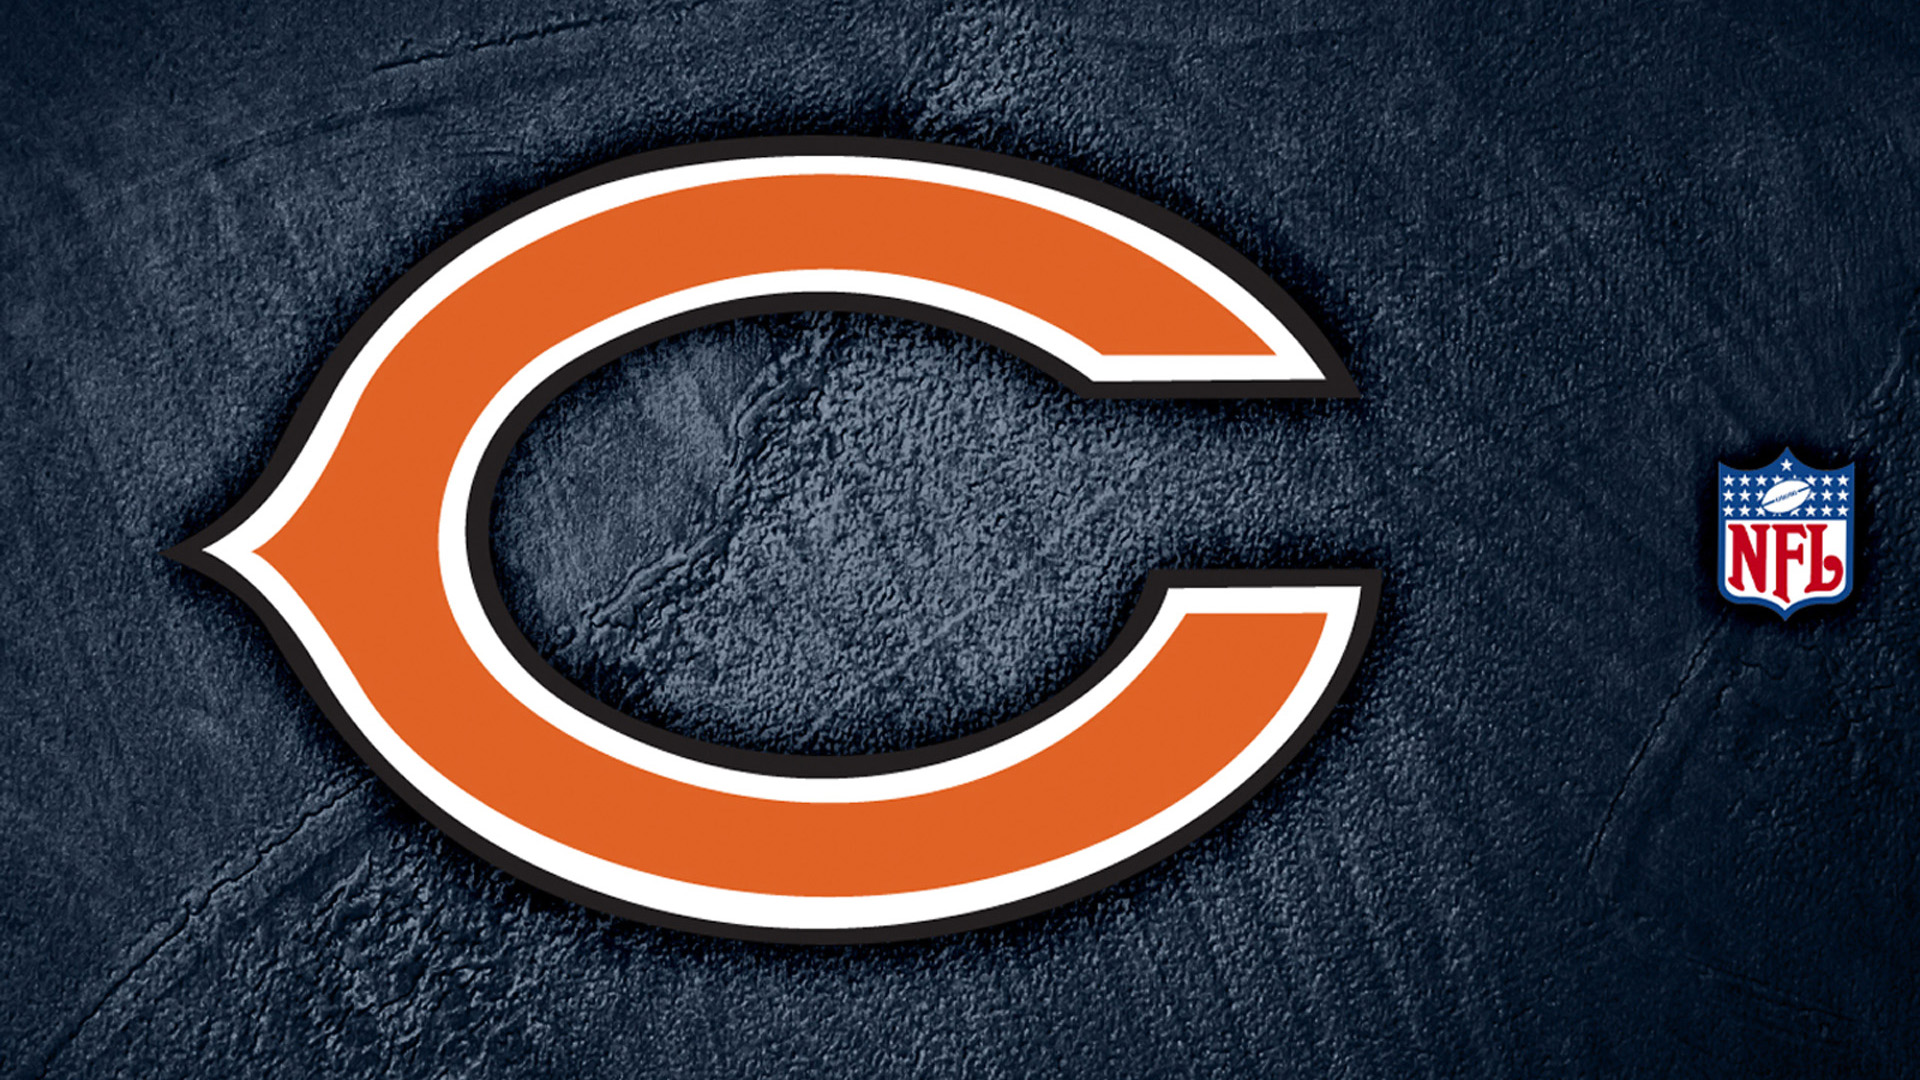 More Chicago Bears wallpaper wallpapers Chicago Bears wallpapers 1920x1080